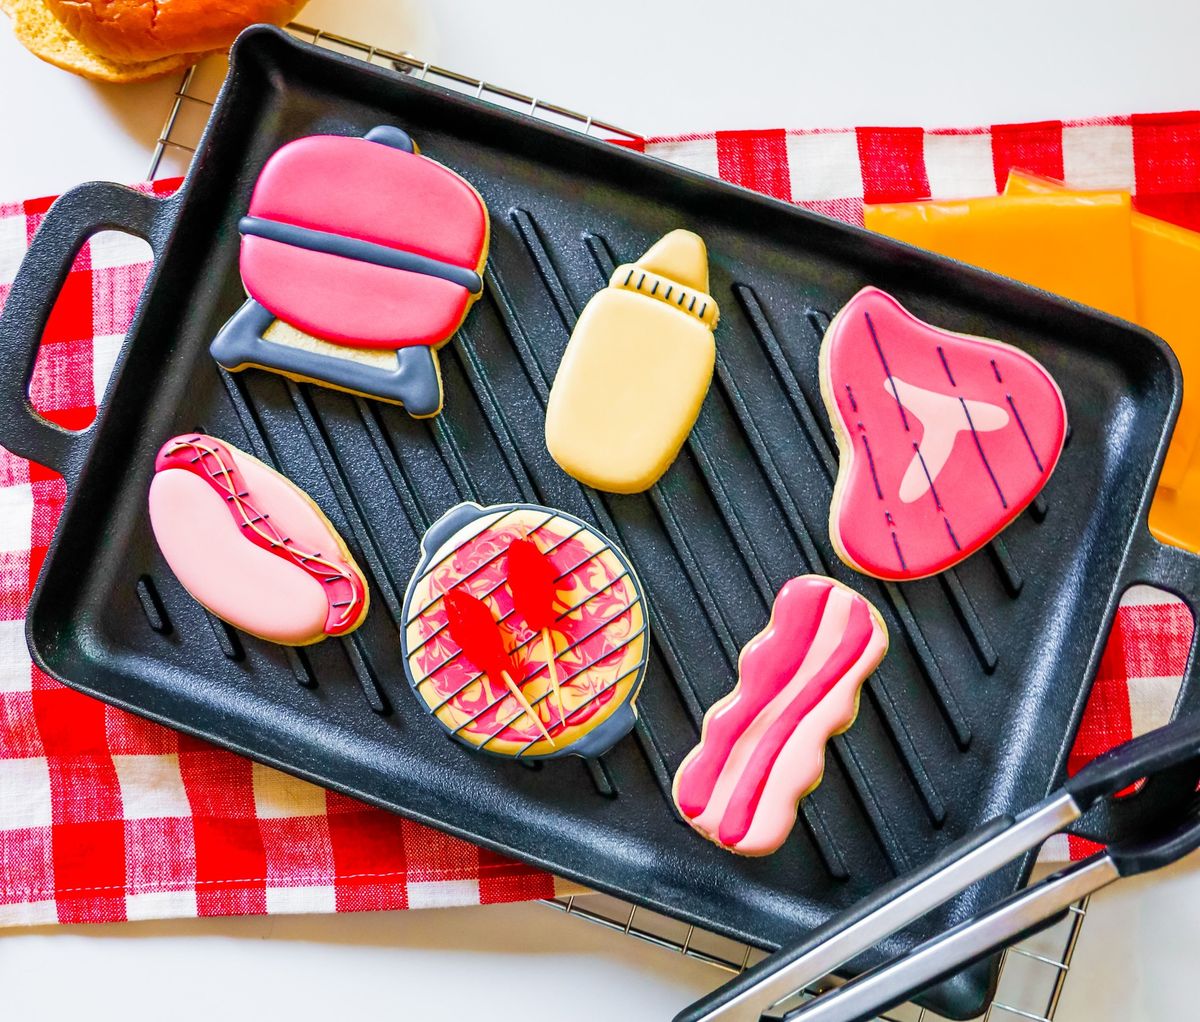 Grill and Chill cookie decorating class